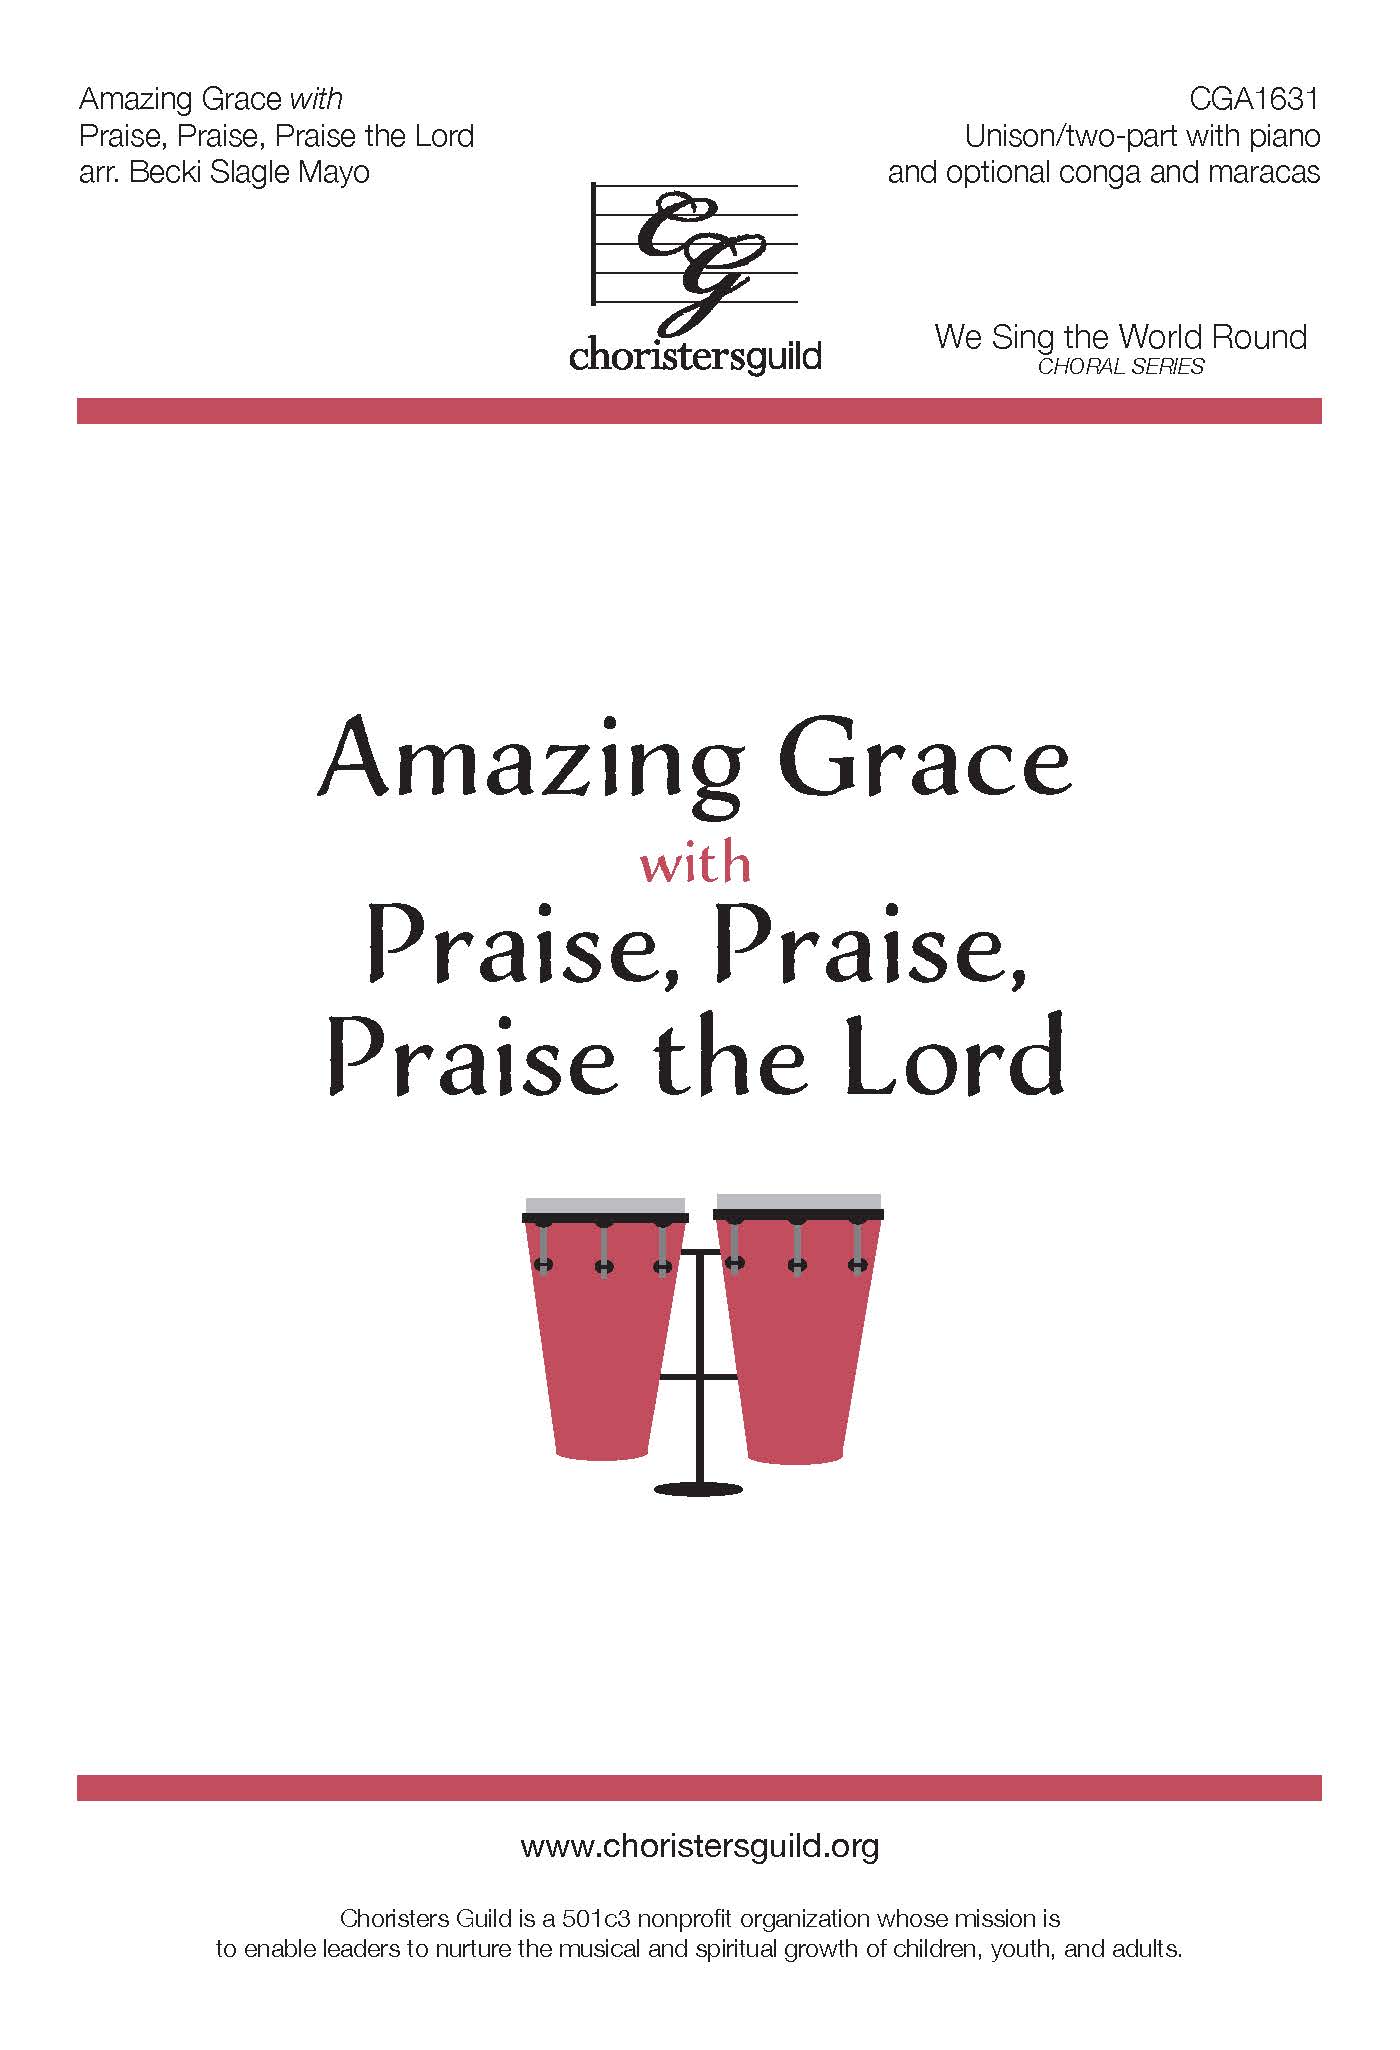 Amazing Grace with Praise, Praise, Praise the Lord (Accompaniment Track)